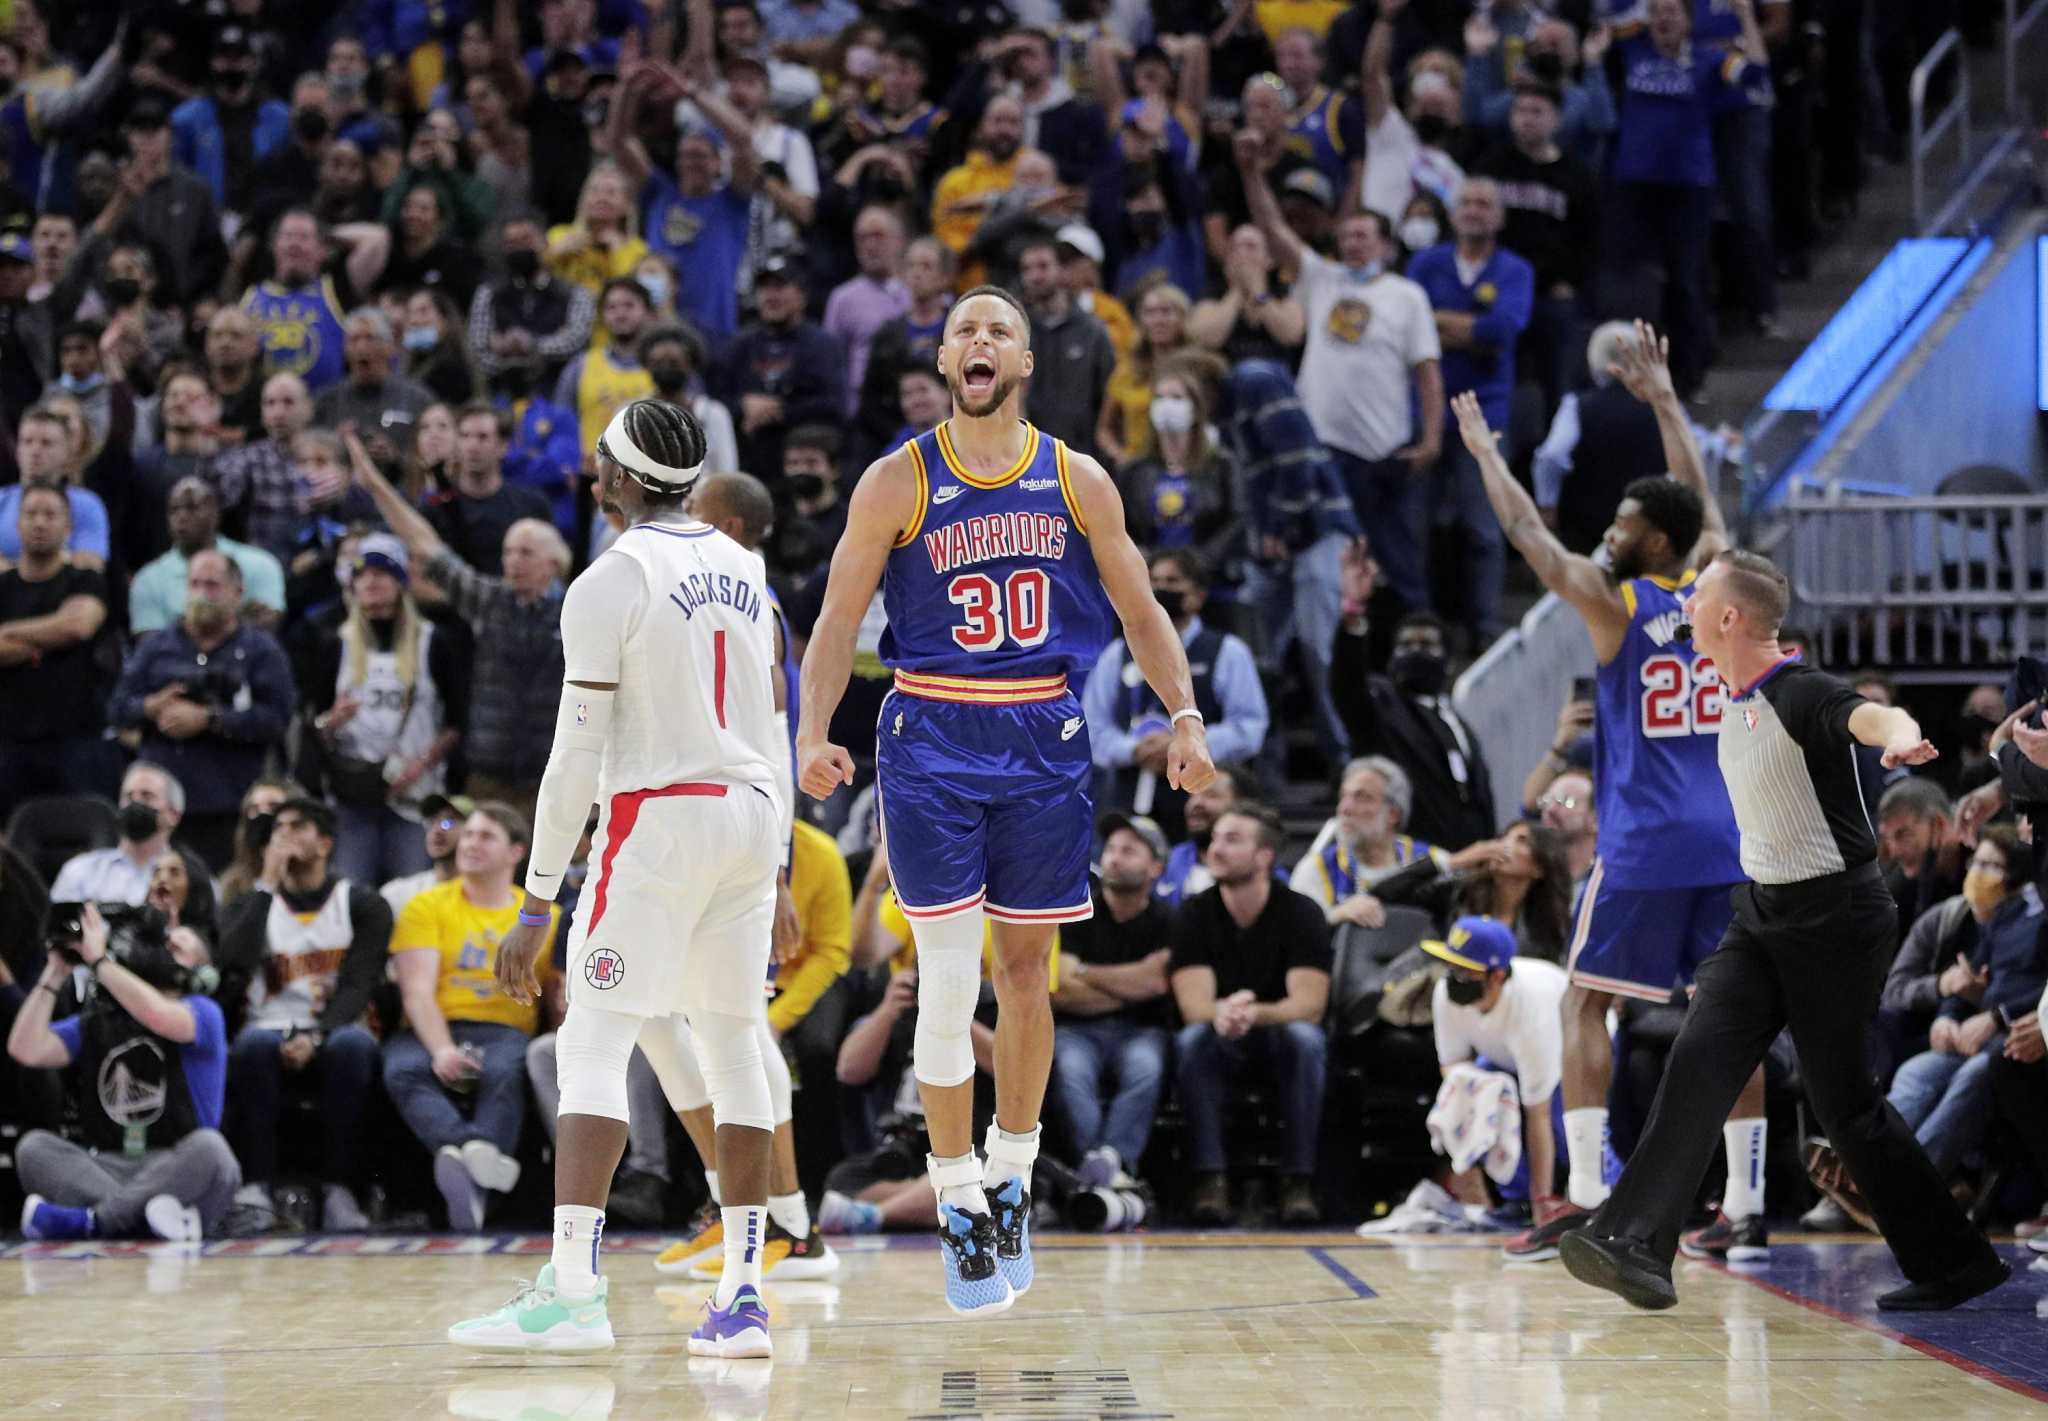 Stephen Curry thumped the Clippers with 38-points to give the